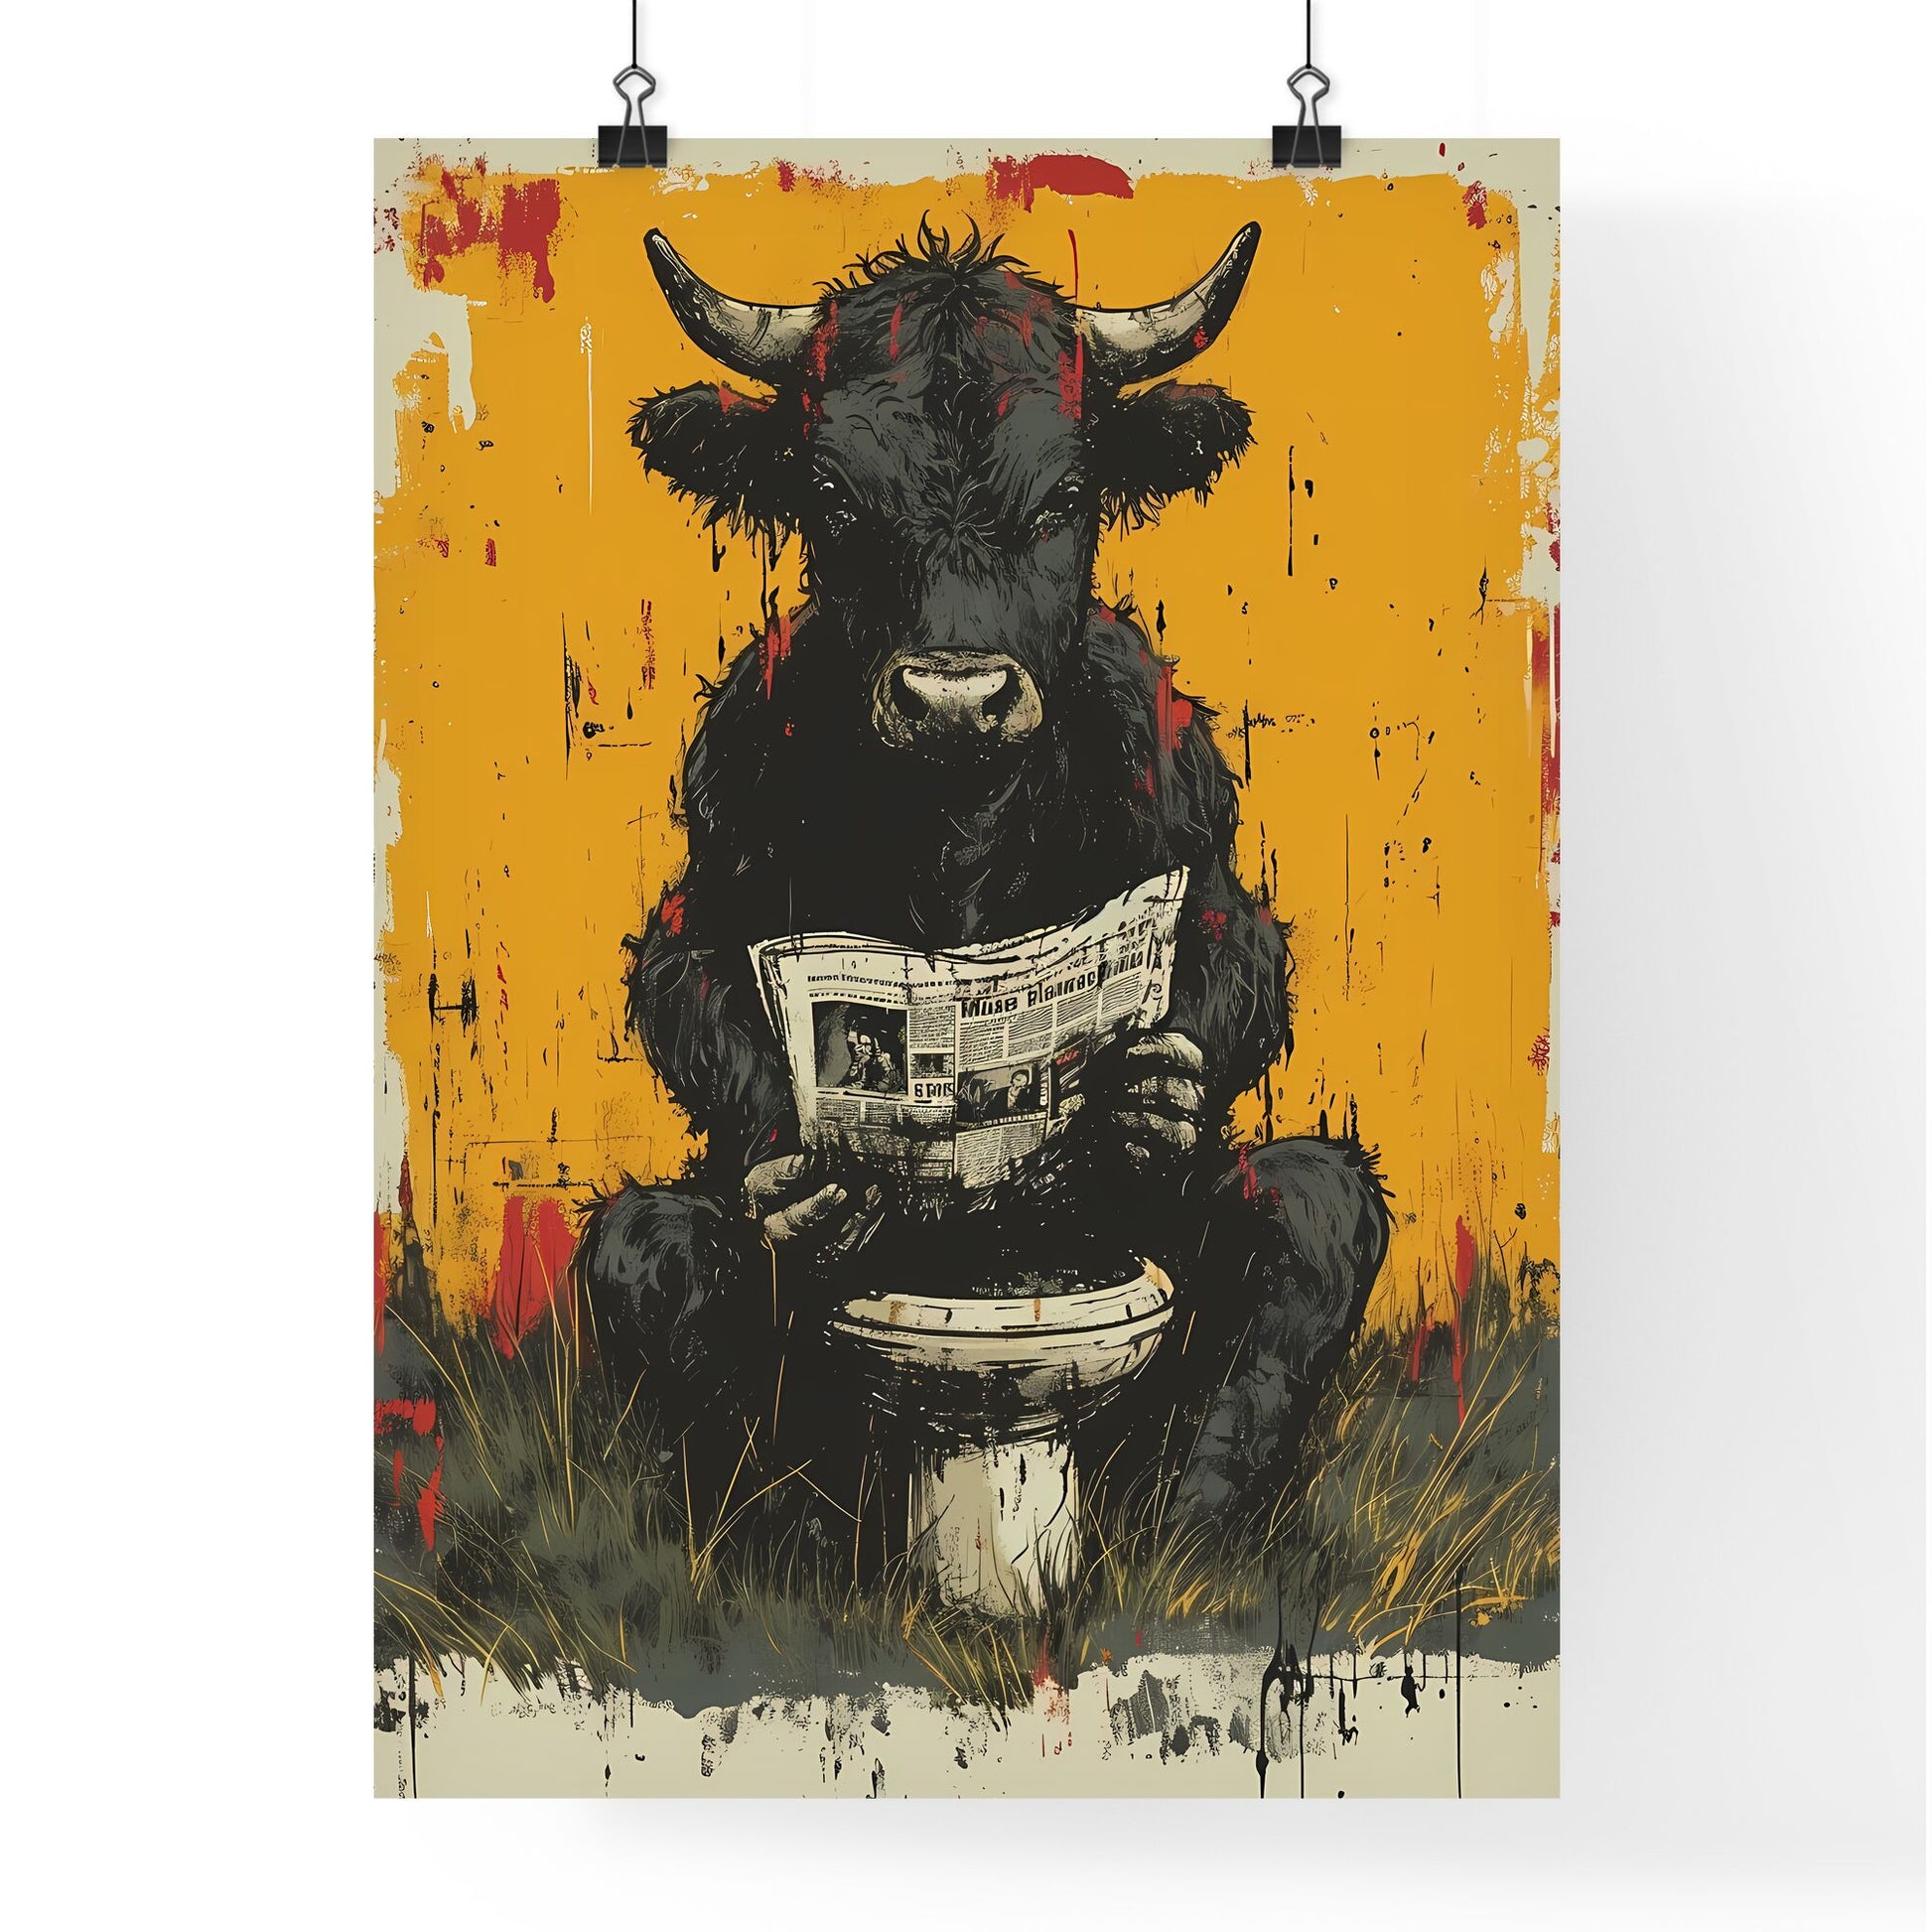 A cow sitting on a tiny toilet - Art print of a bull sitting on a toilet reading a newspaper Default Title